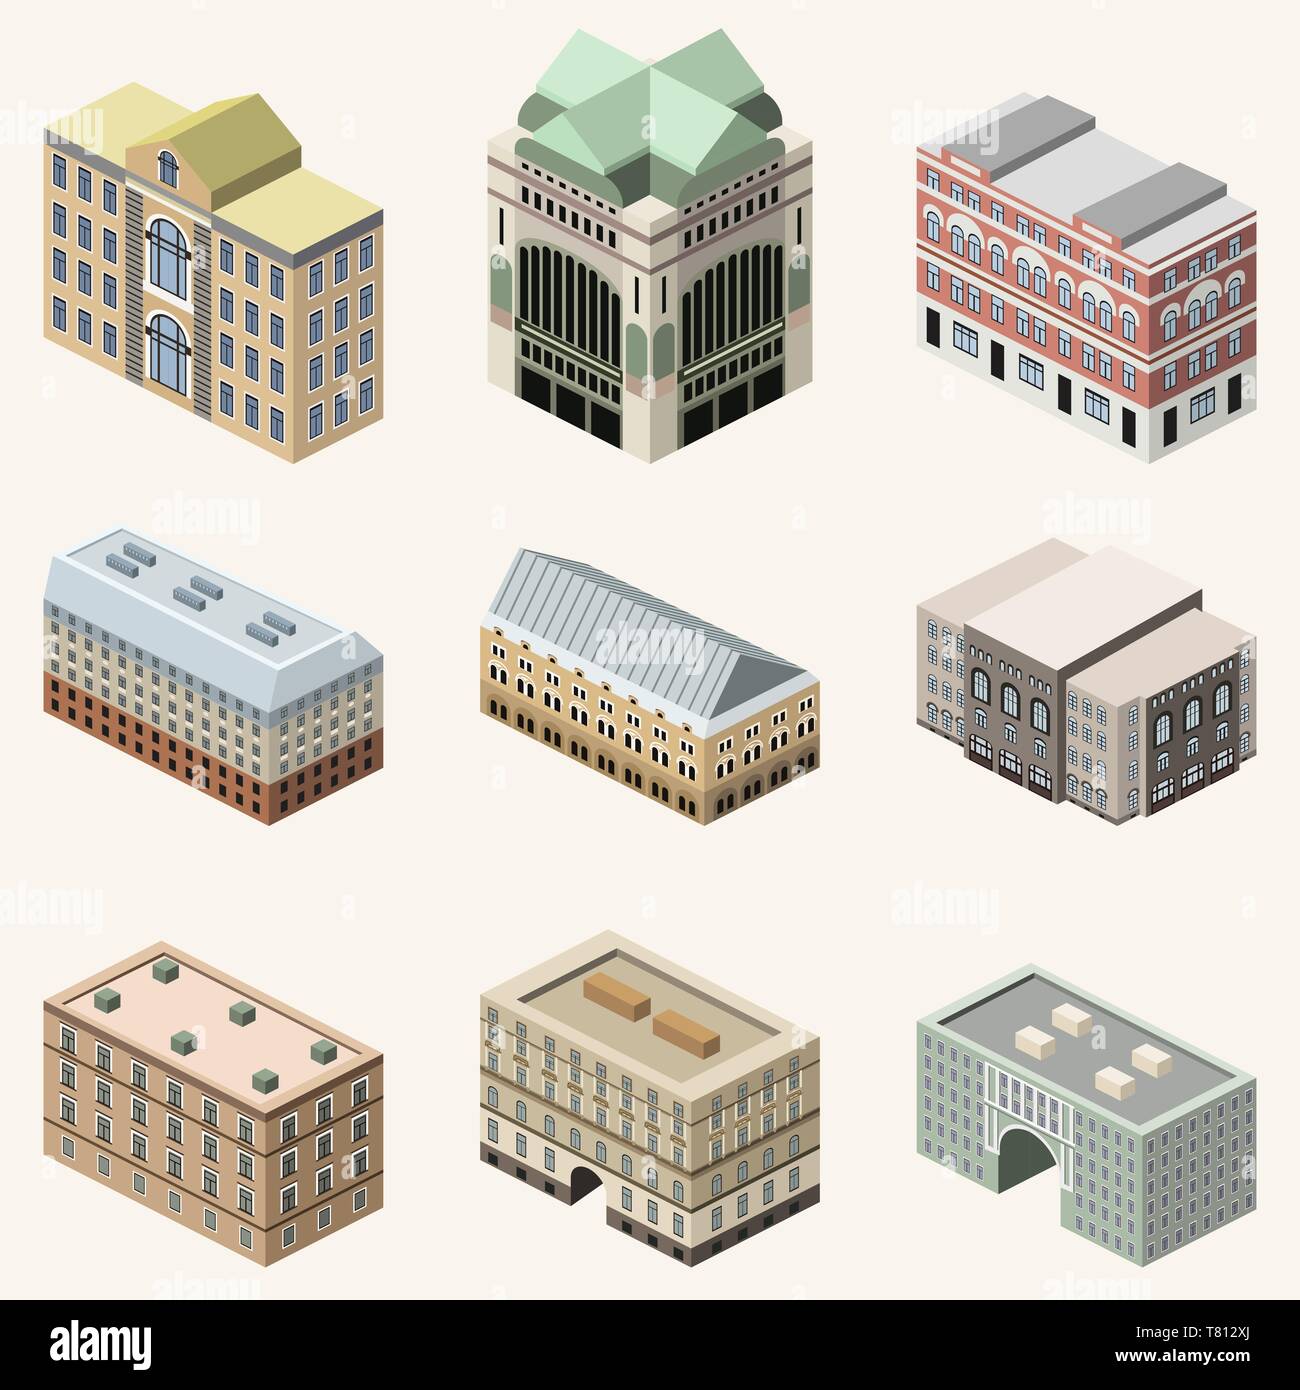 vector collection of 3d isometric buildings. Isolated icons set Stock Vector